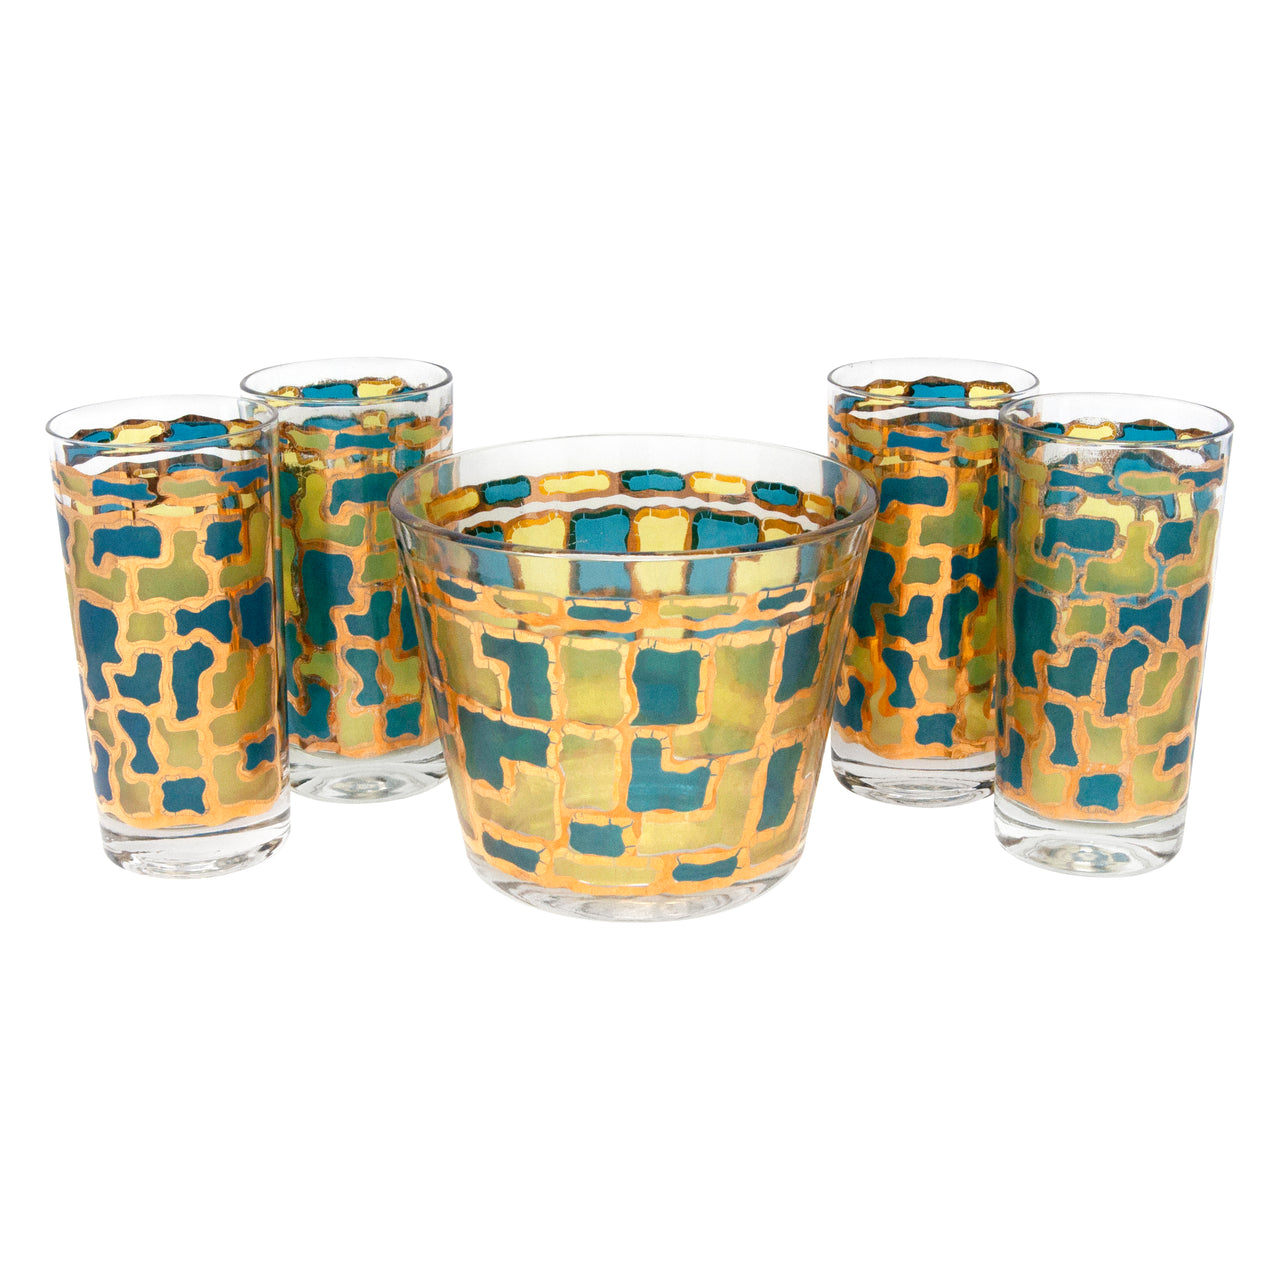 Vintage Multi Color Stained Glass Ice Bucket Cocktail Set | The Hour Shop